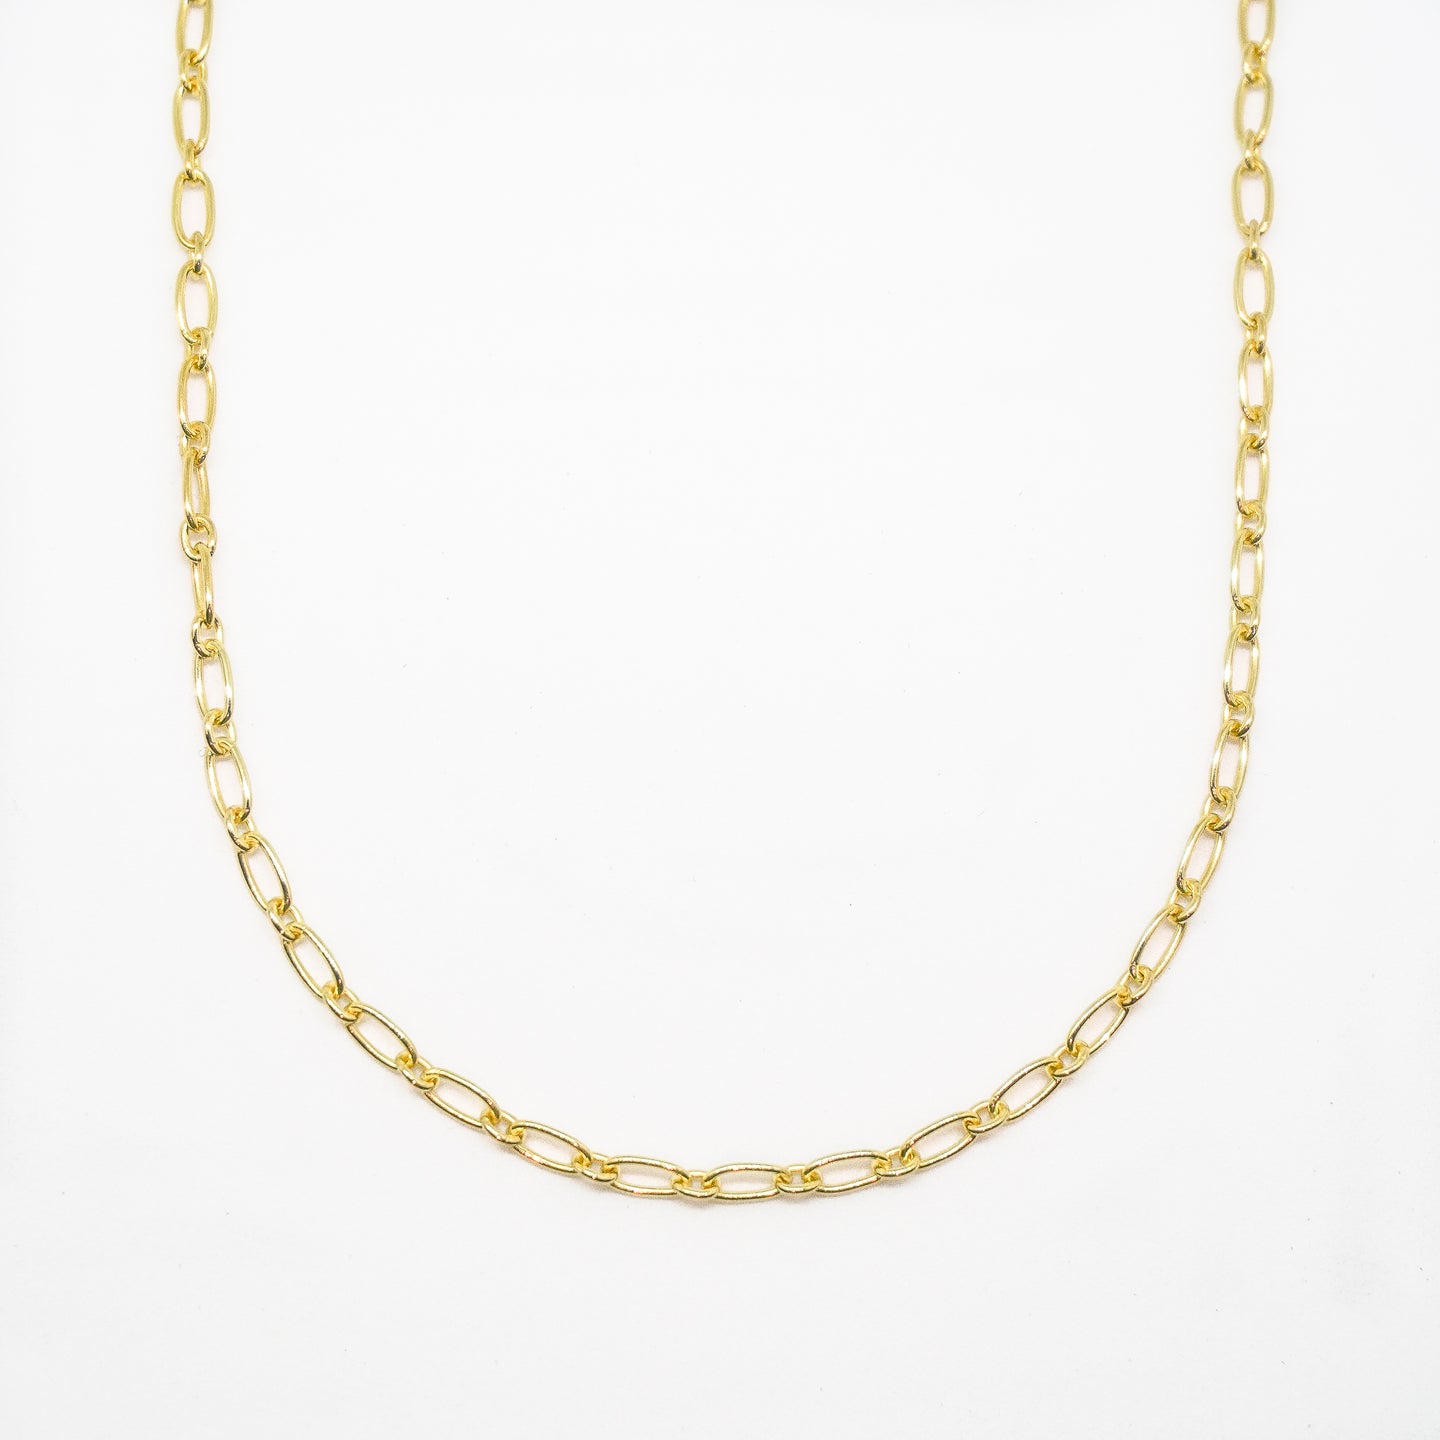 18k Gold Vermeil Oval Link Chain Necklace